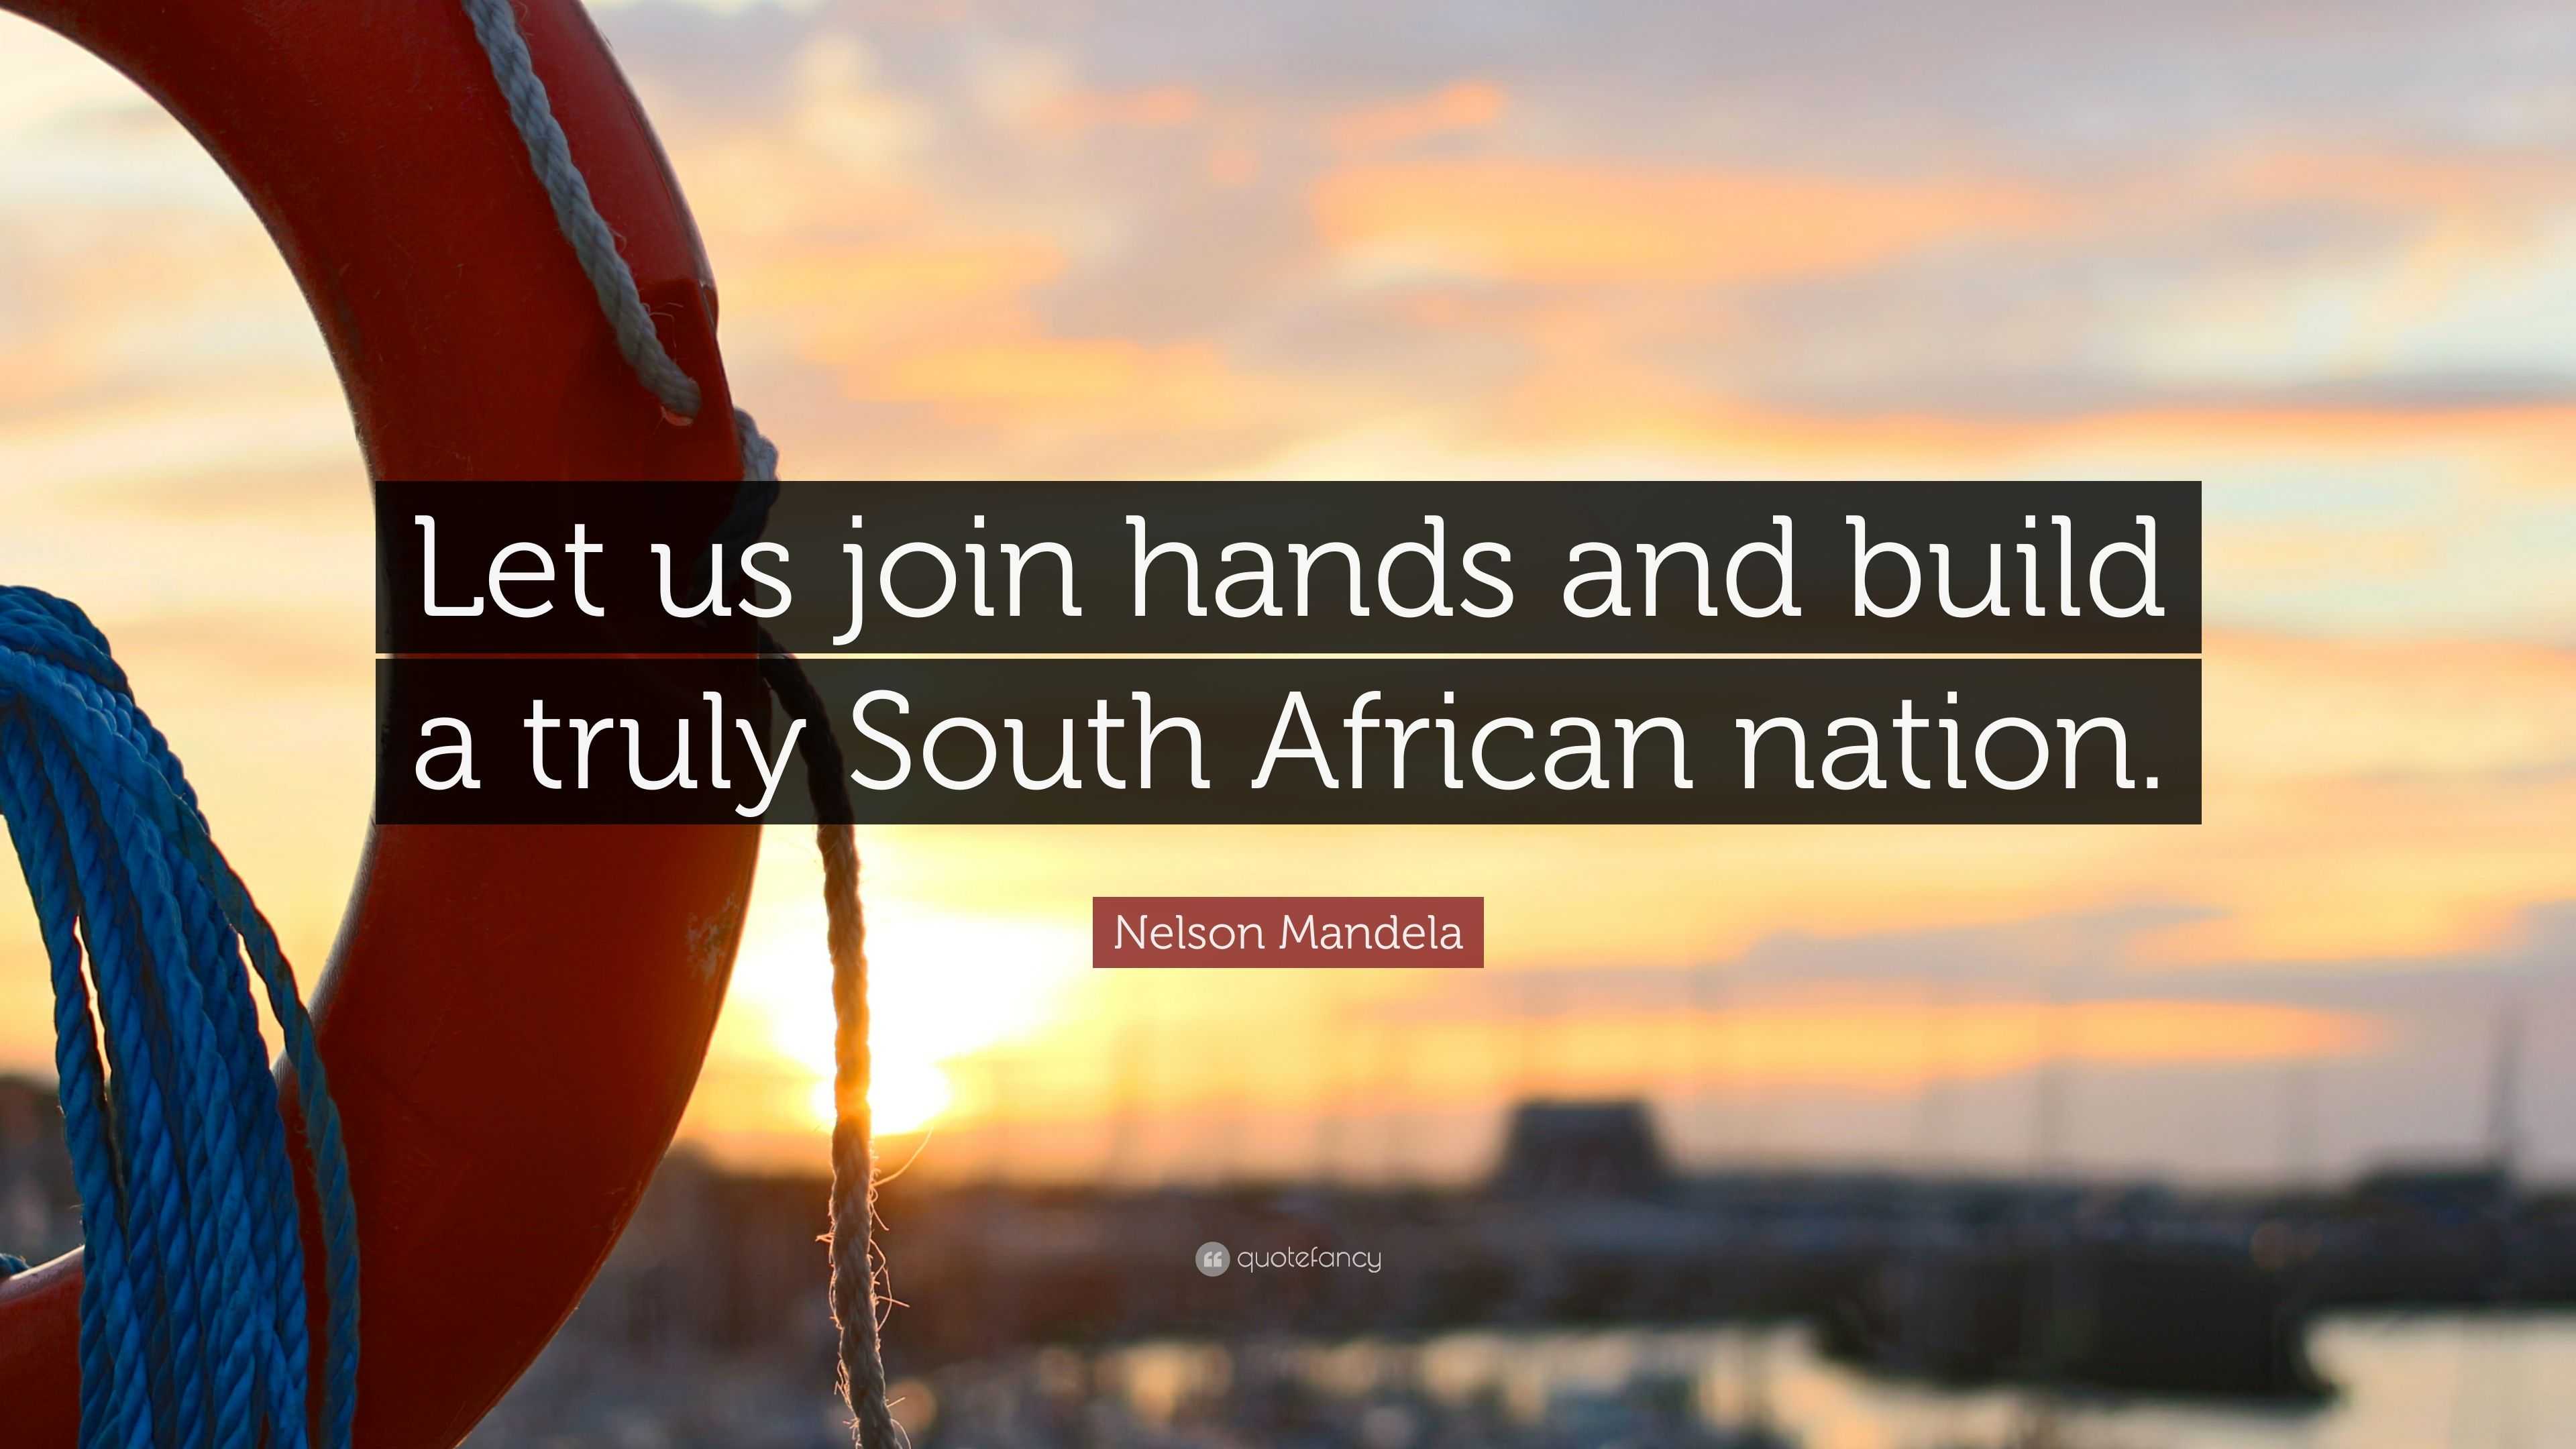 Nelson Mandela Quote: “Let us join hands and build a truly South African  nation.”